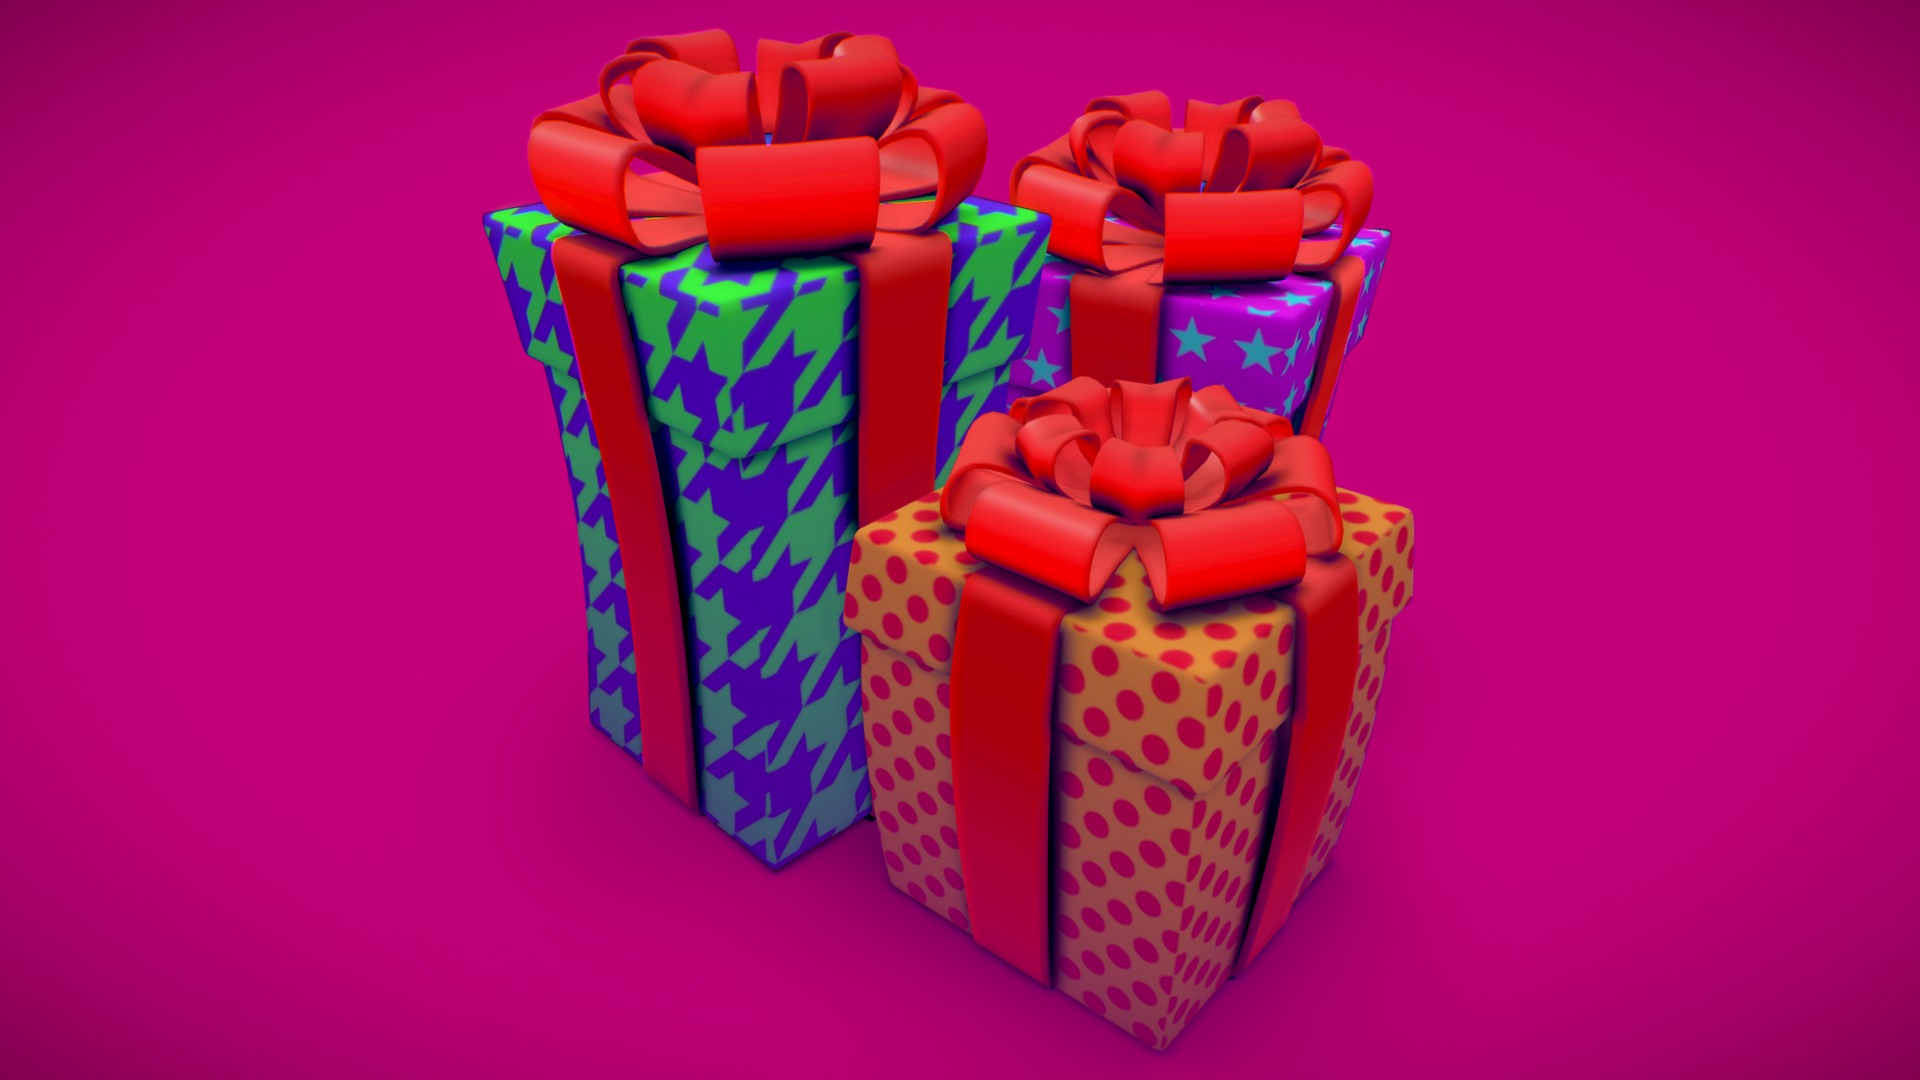 3D model #3December #Day16 Epileptic Gifts - This is a 3D model of the #3December #Day16 Epileptic Gifts. The 3D model is about a group of colorful socks.